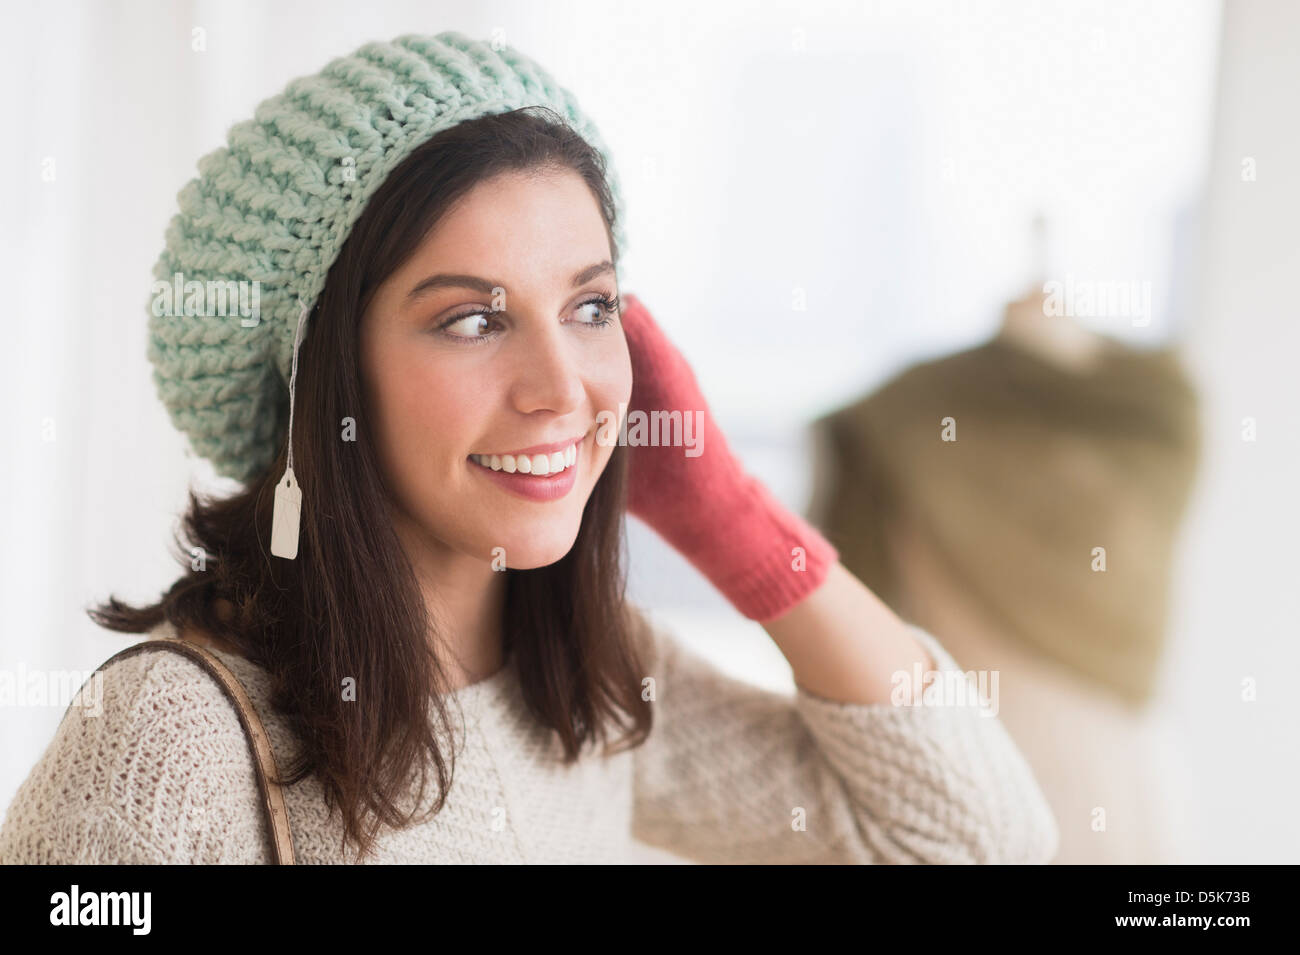 Woman trying on knit hat Stock Photo